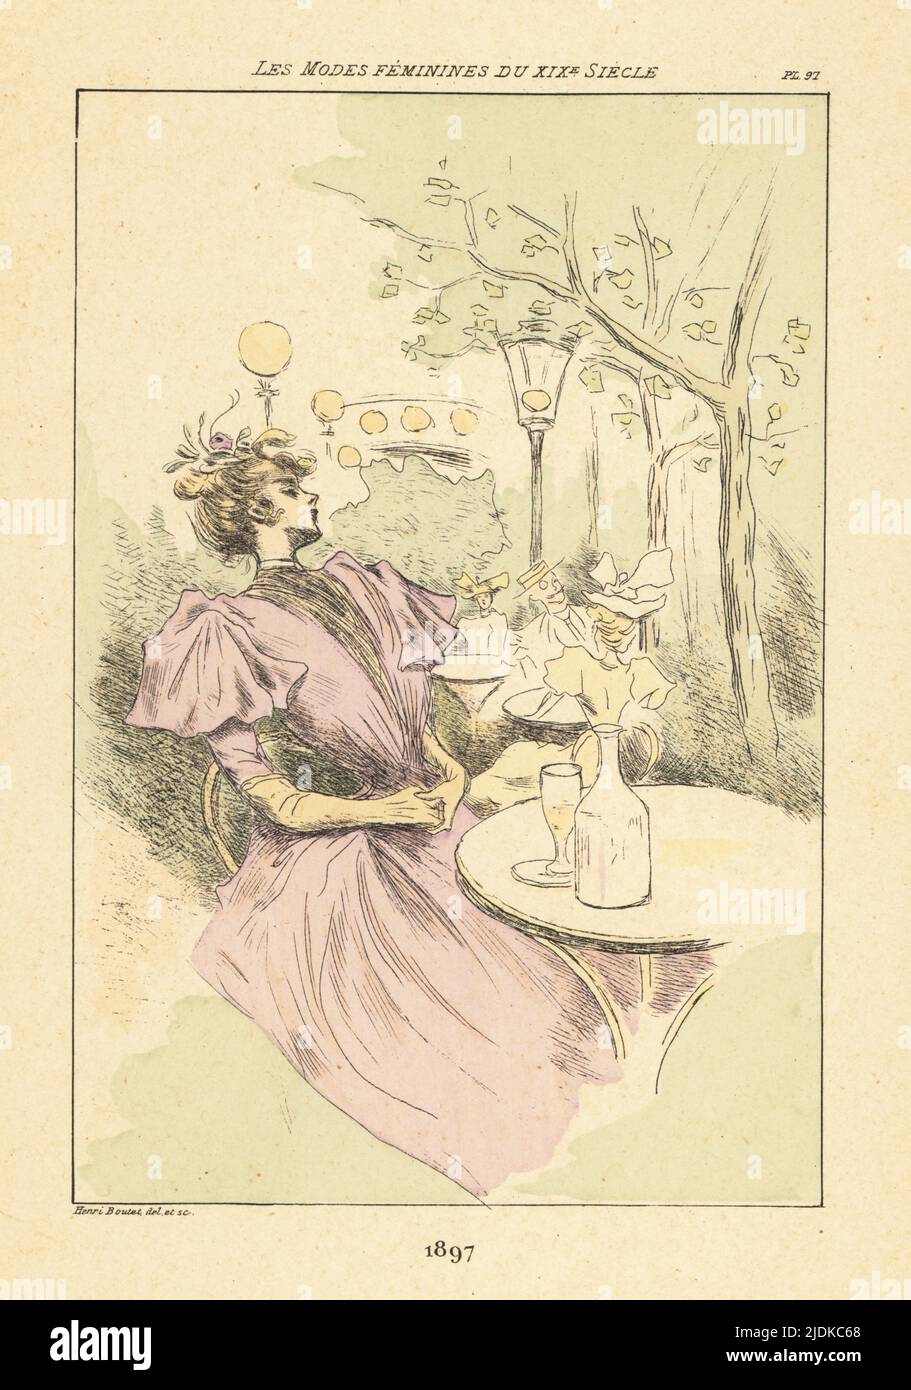 Fashionable lady drinking at a table in a pleasure garden under gas lamps, Paris, 1897. With flowers in her hair, dress with tight waist, large puff sleeves and full skirts. Handcoloured drypoint or pointe-seche etching by Henri Boutet from Les Modes Feminines du XIXeme Siecle (Feminine Fashions of the 19th Century), Ernest Flammarion, Paris, 1902. Boutet (1851-1919) was a French artist, engraver, lithographer and designer. Stock Photo